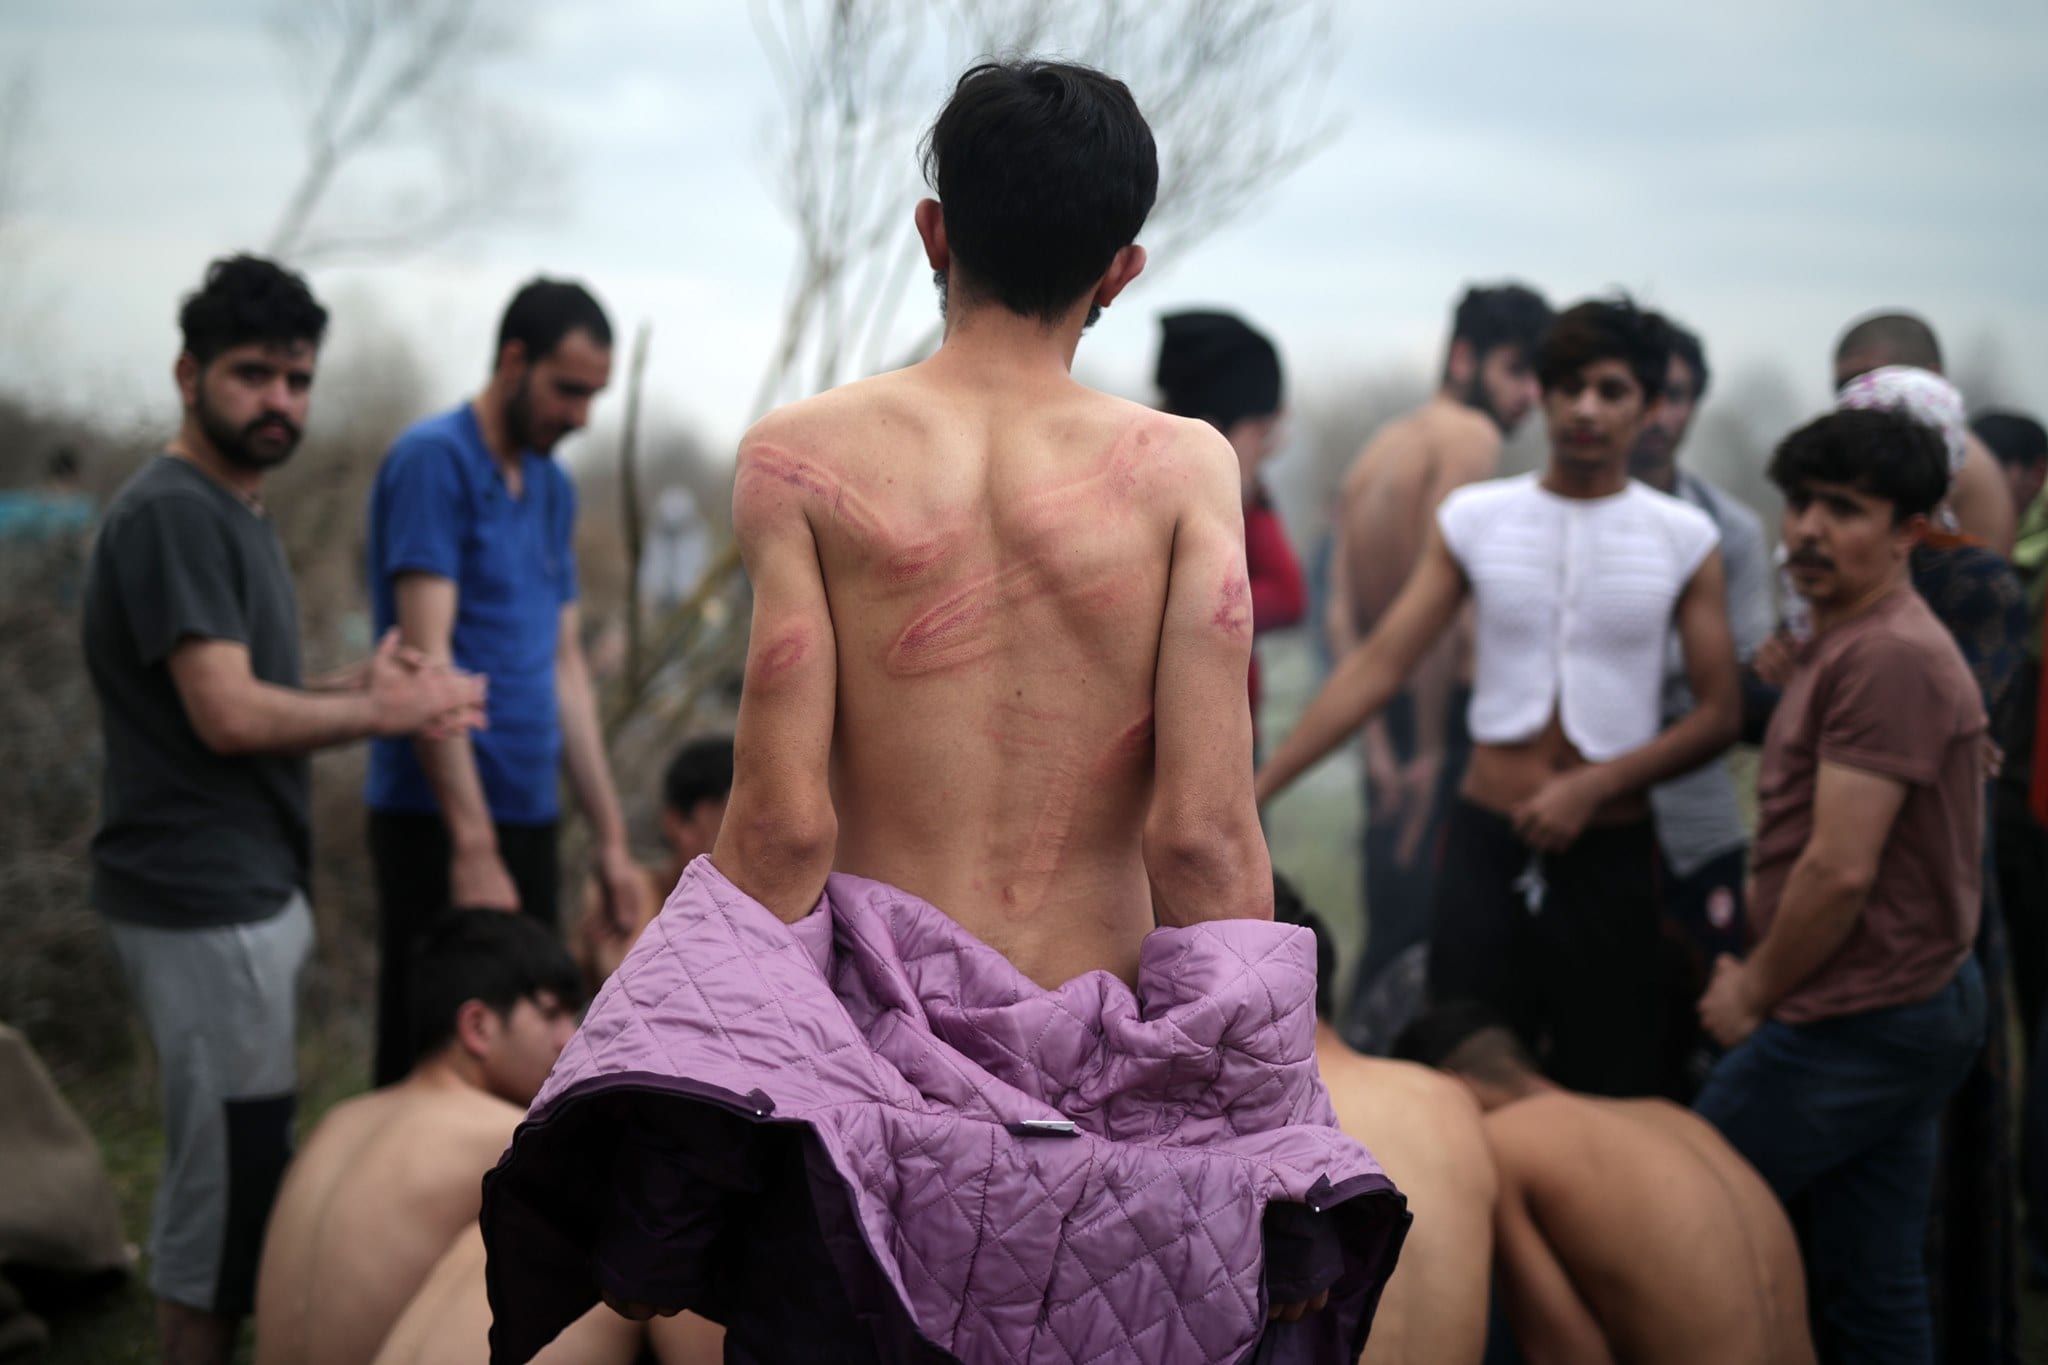 Syrian refugees tortured in Greece [Twitter]